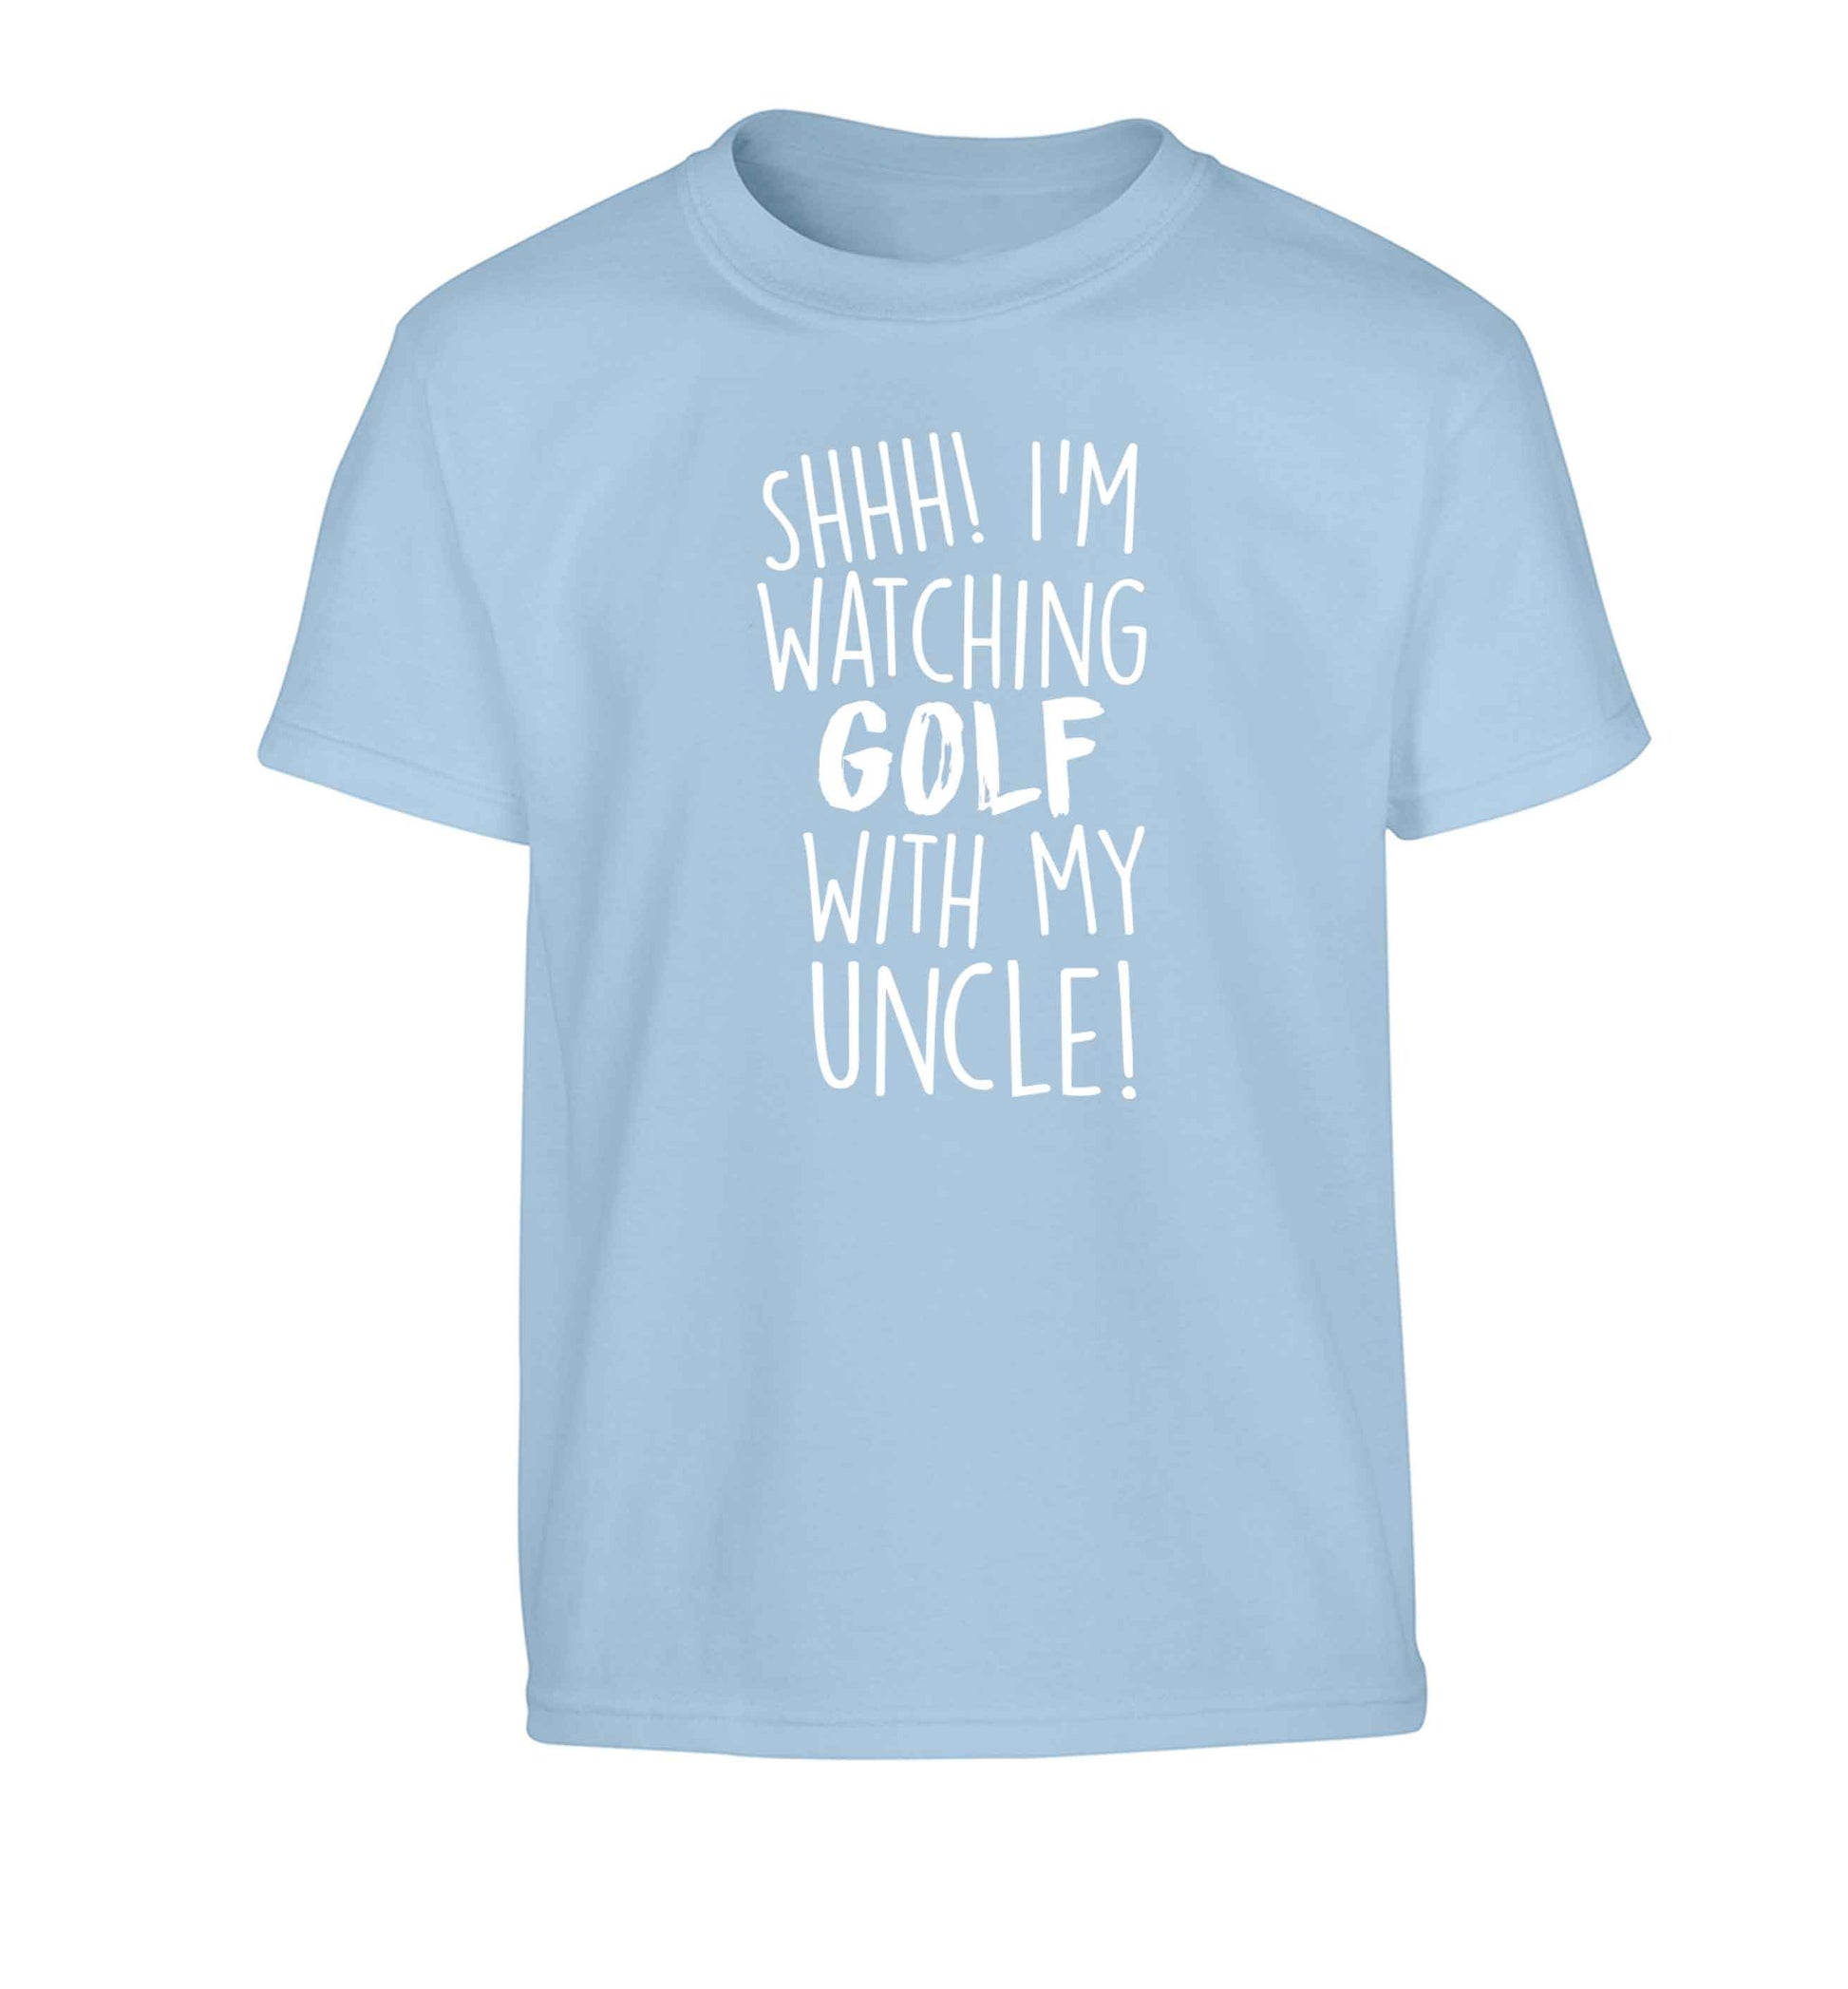 Shh I'm watching golf with my uncle Children's light blue Tshirt 12-13 Years